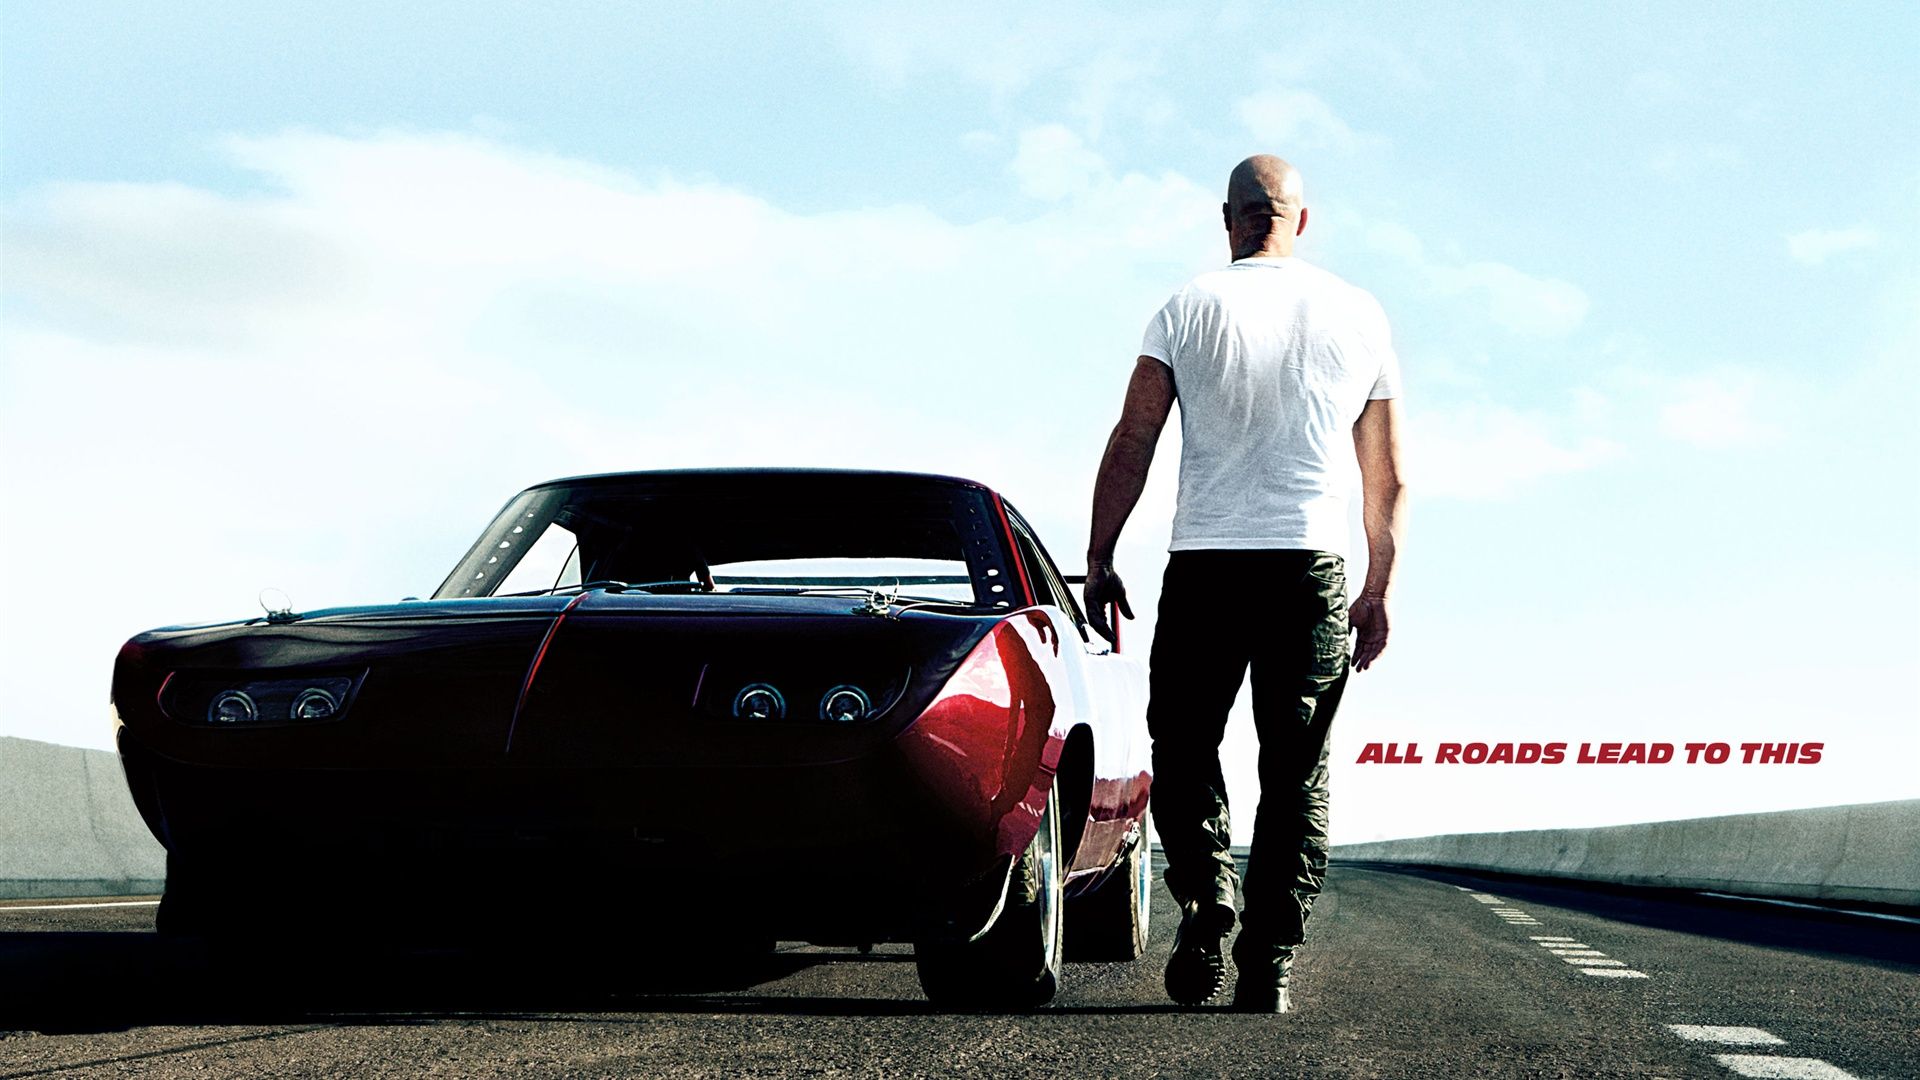 Fast and Furious HD Wallpaper